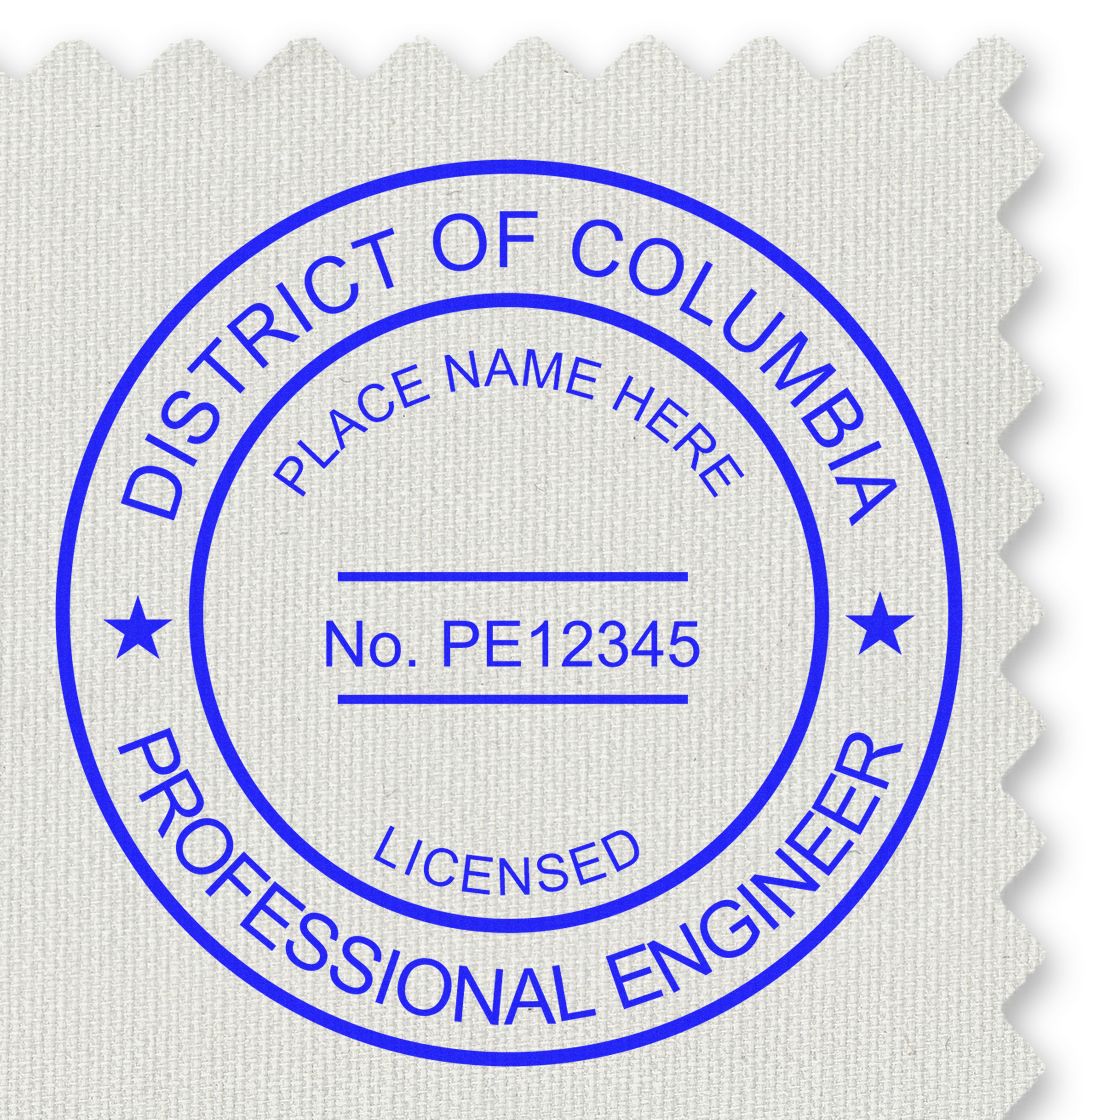 The Slim Pre-Inked District of Columbia Professional Engineer Seal Stamp stamp impression comes to life with a crisp, detailed photo on paper - showcasing true professional quality.